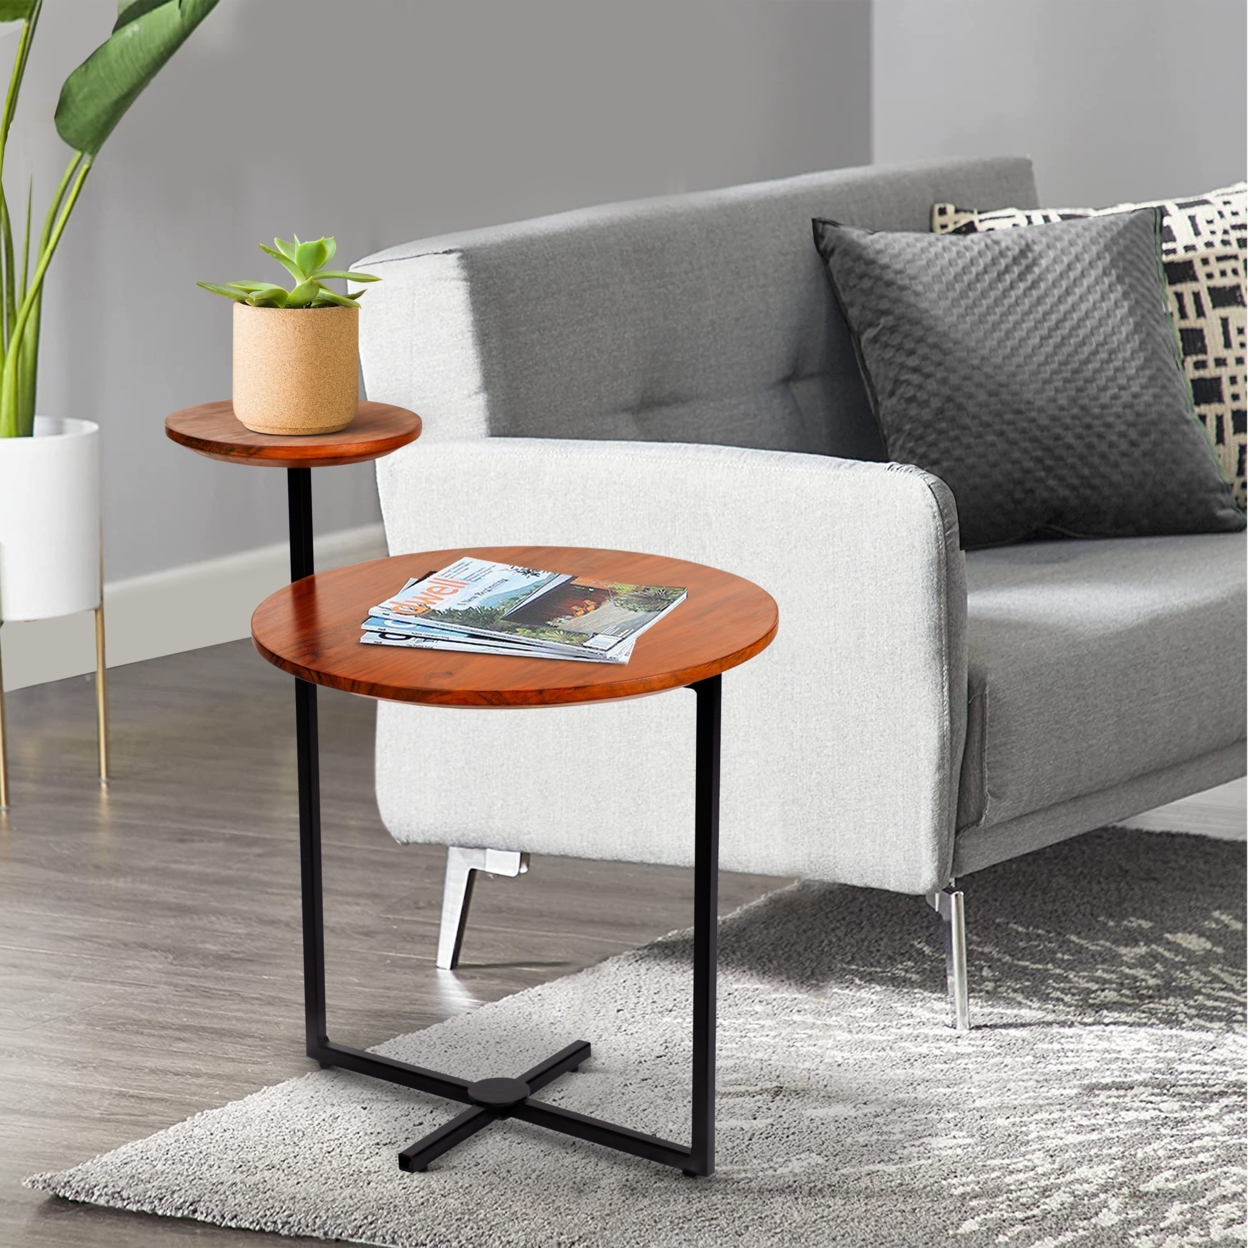 Geo Collection 21 Inch Round Acacia Wood Accent End Table With 2 Tier Tabletops, Brown, Black- Saltoro Sherpi